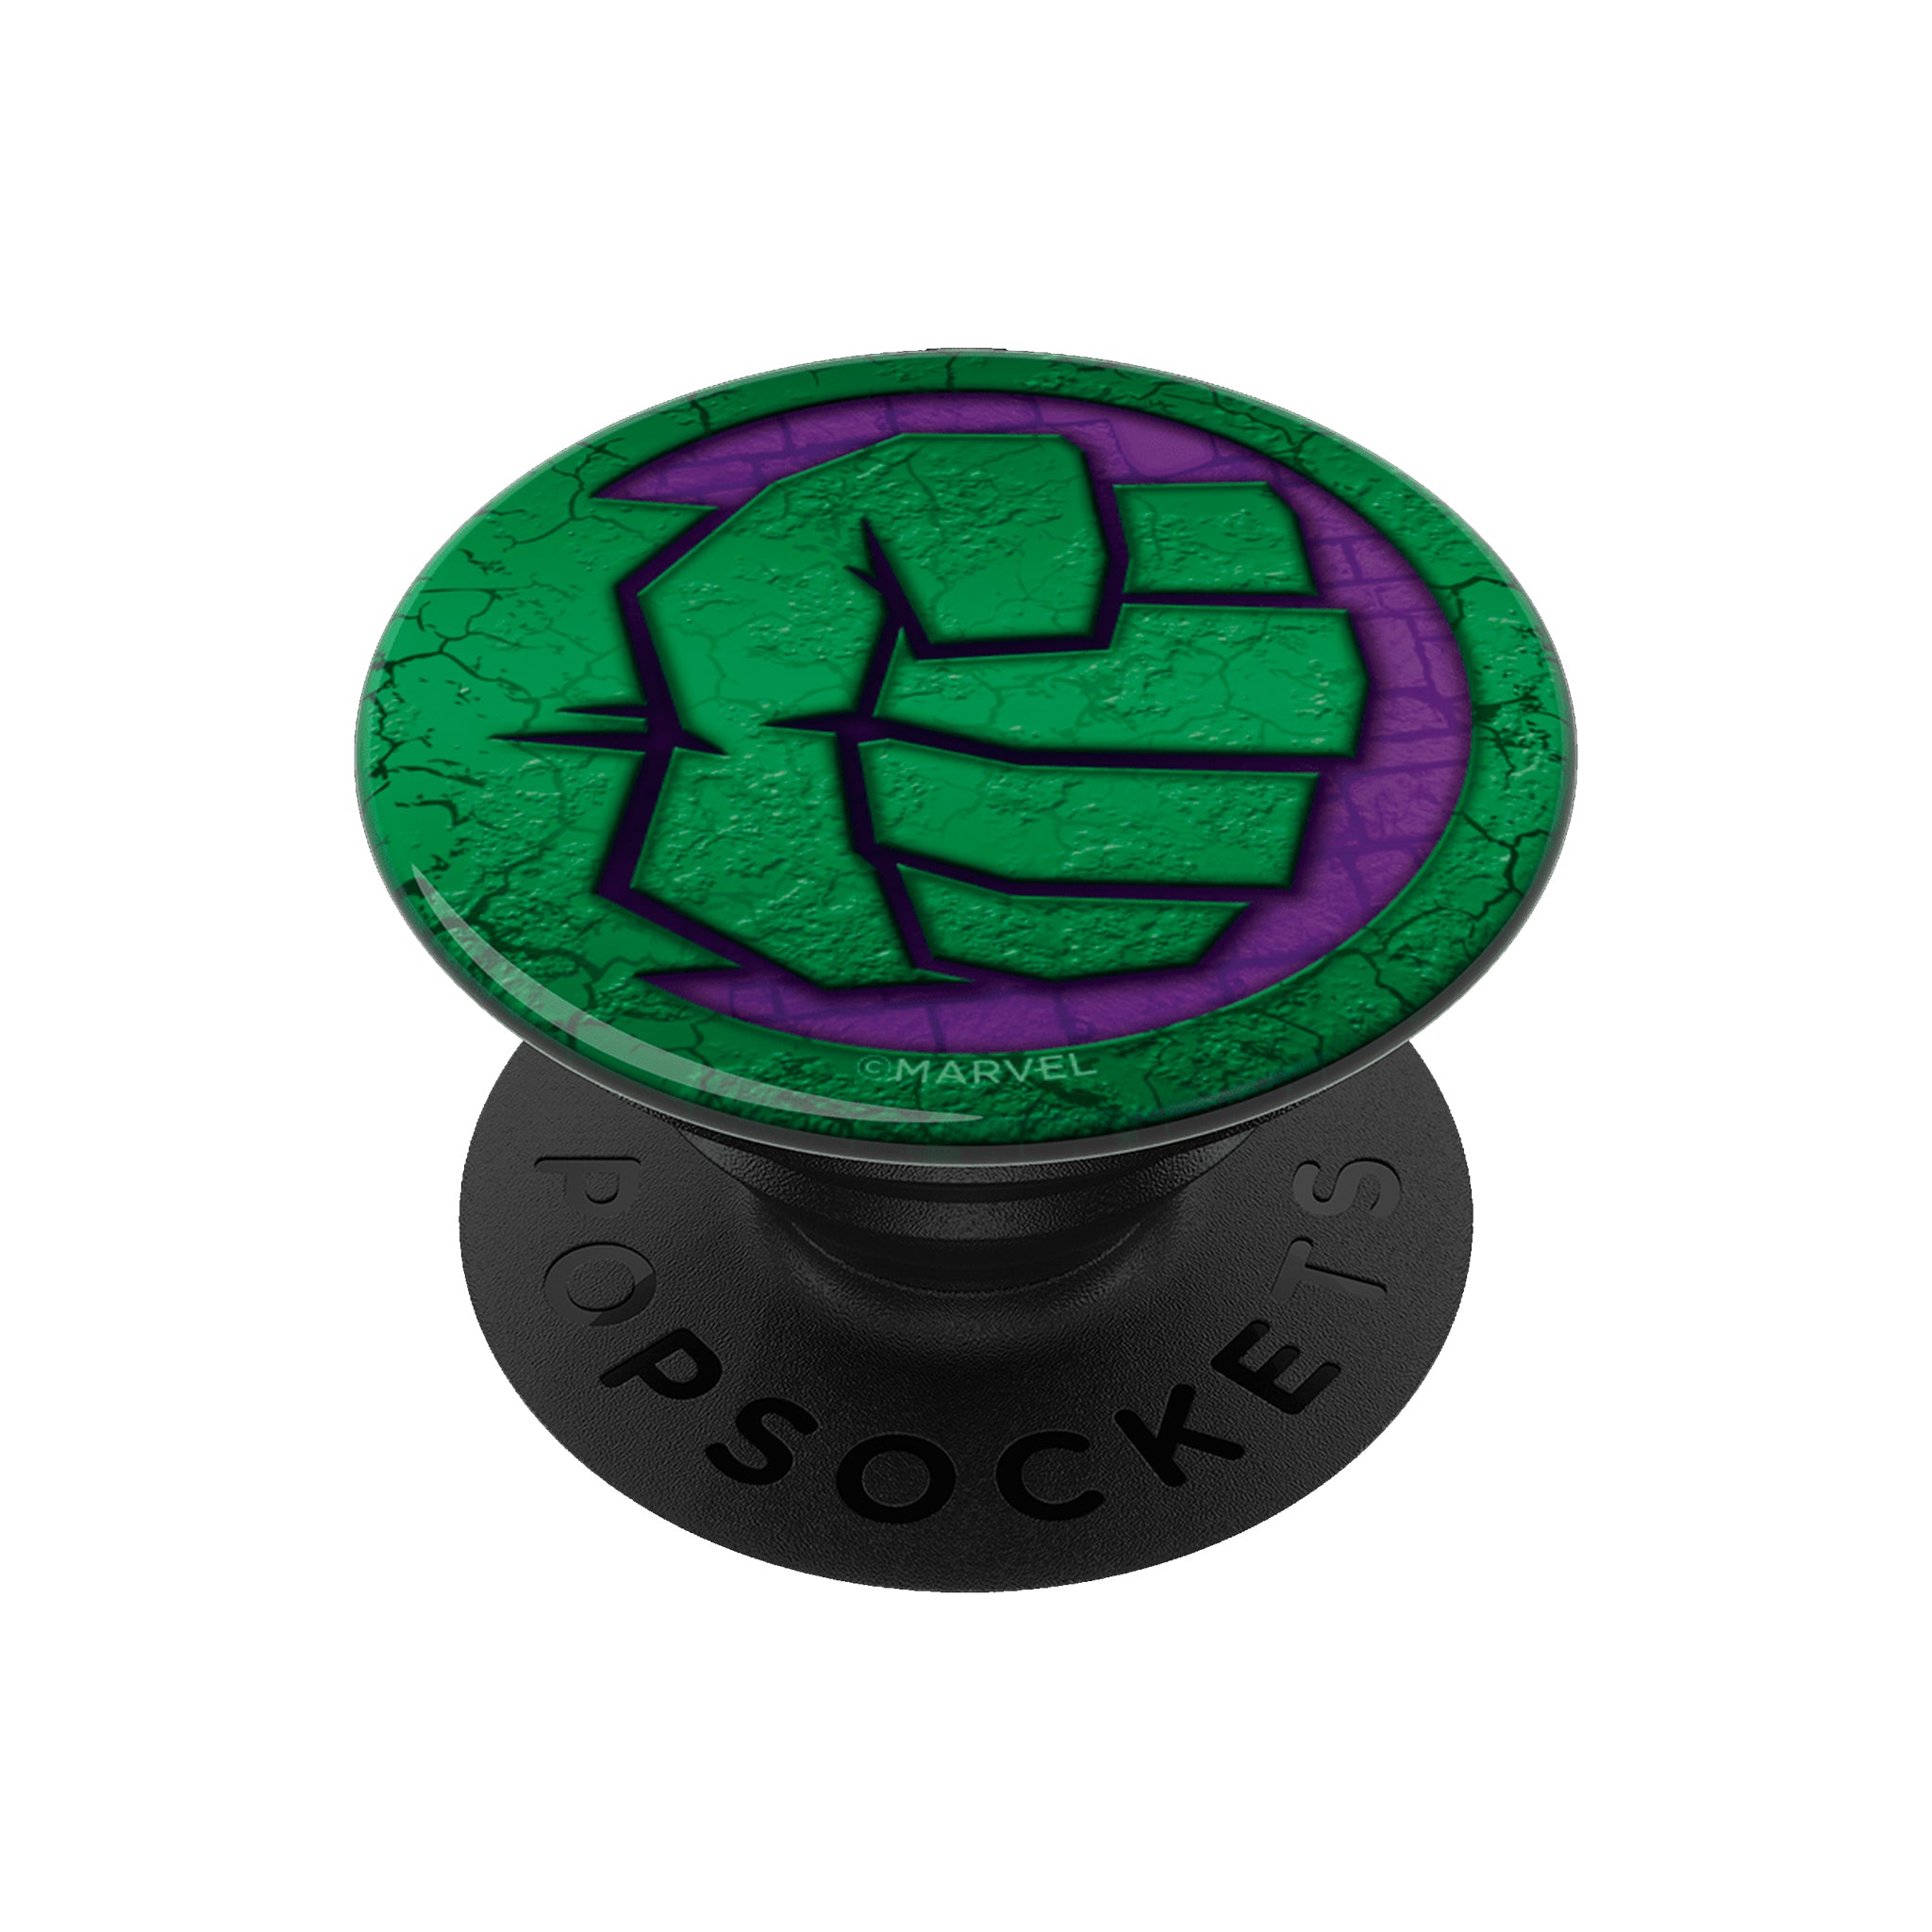 Popsockets - Popgrip Licensed Swappable Device Stand And Grip - Hulk Icon